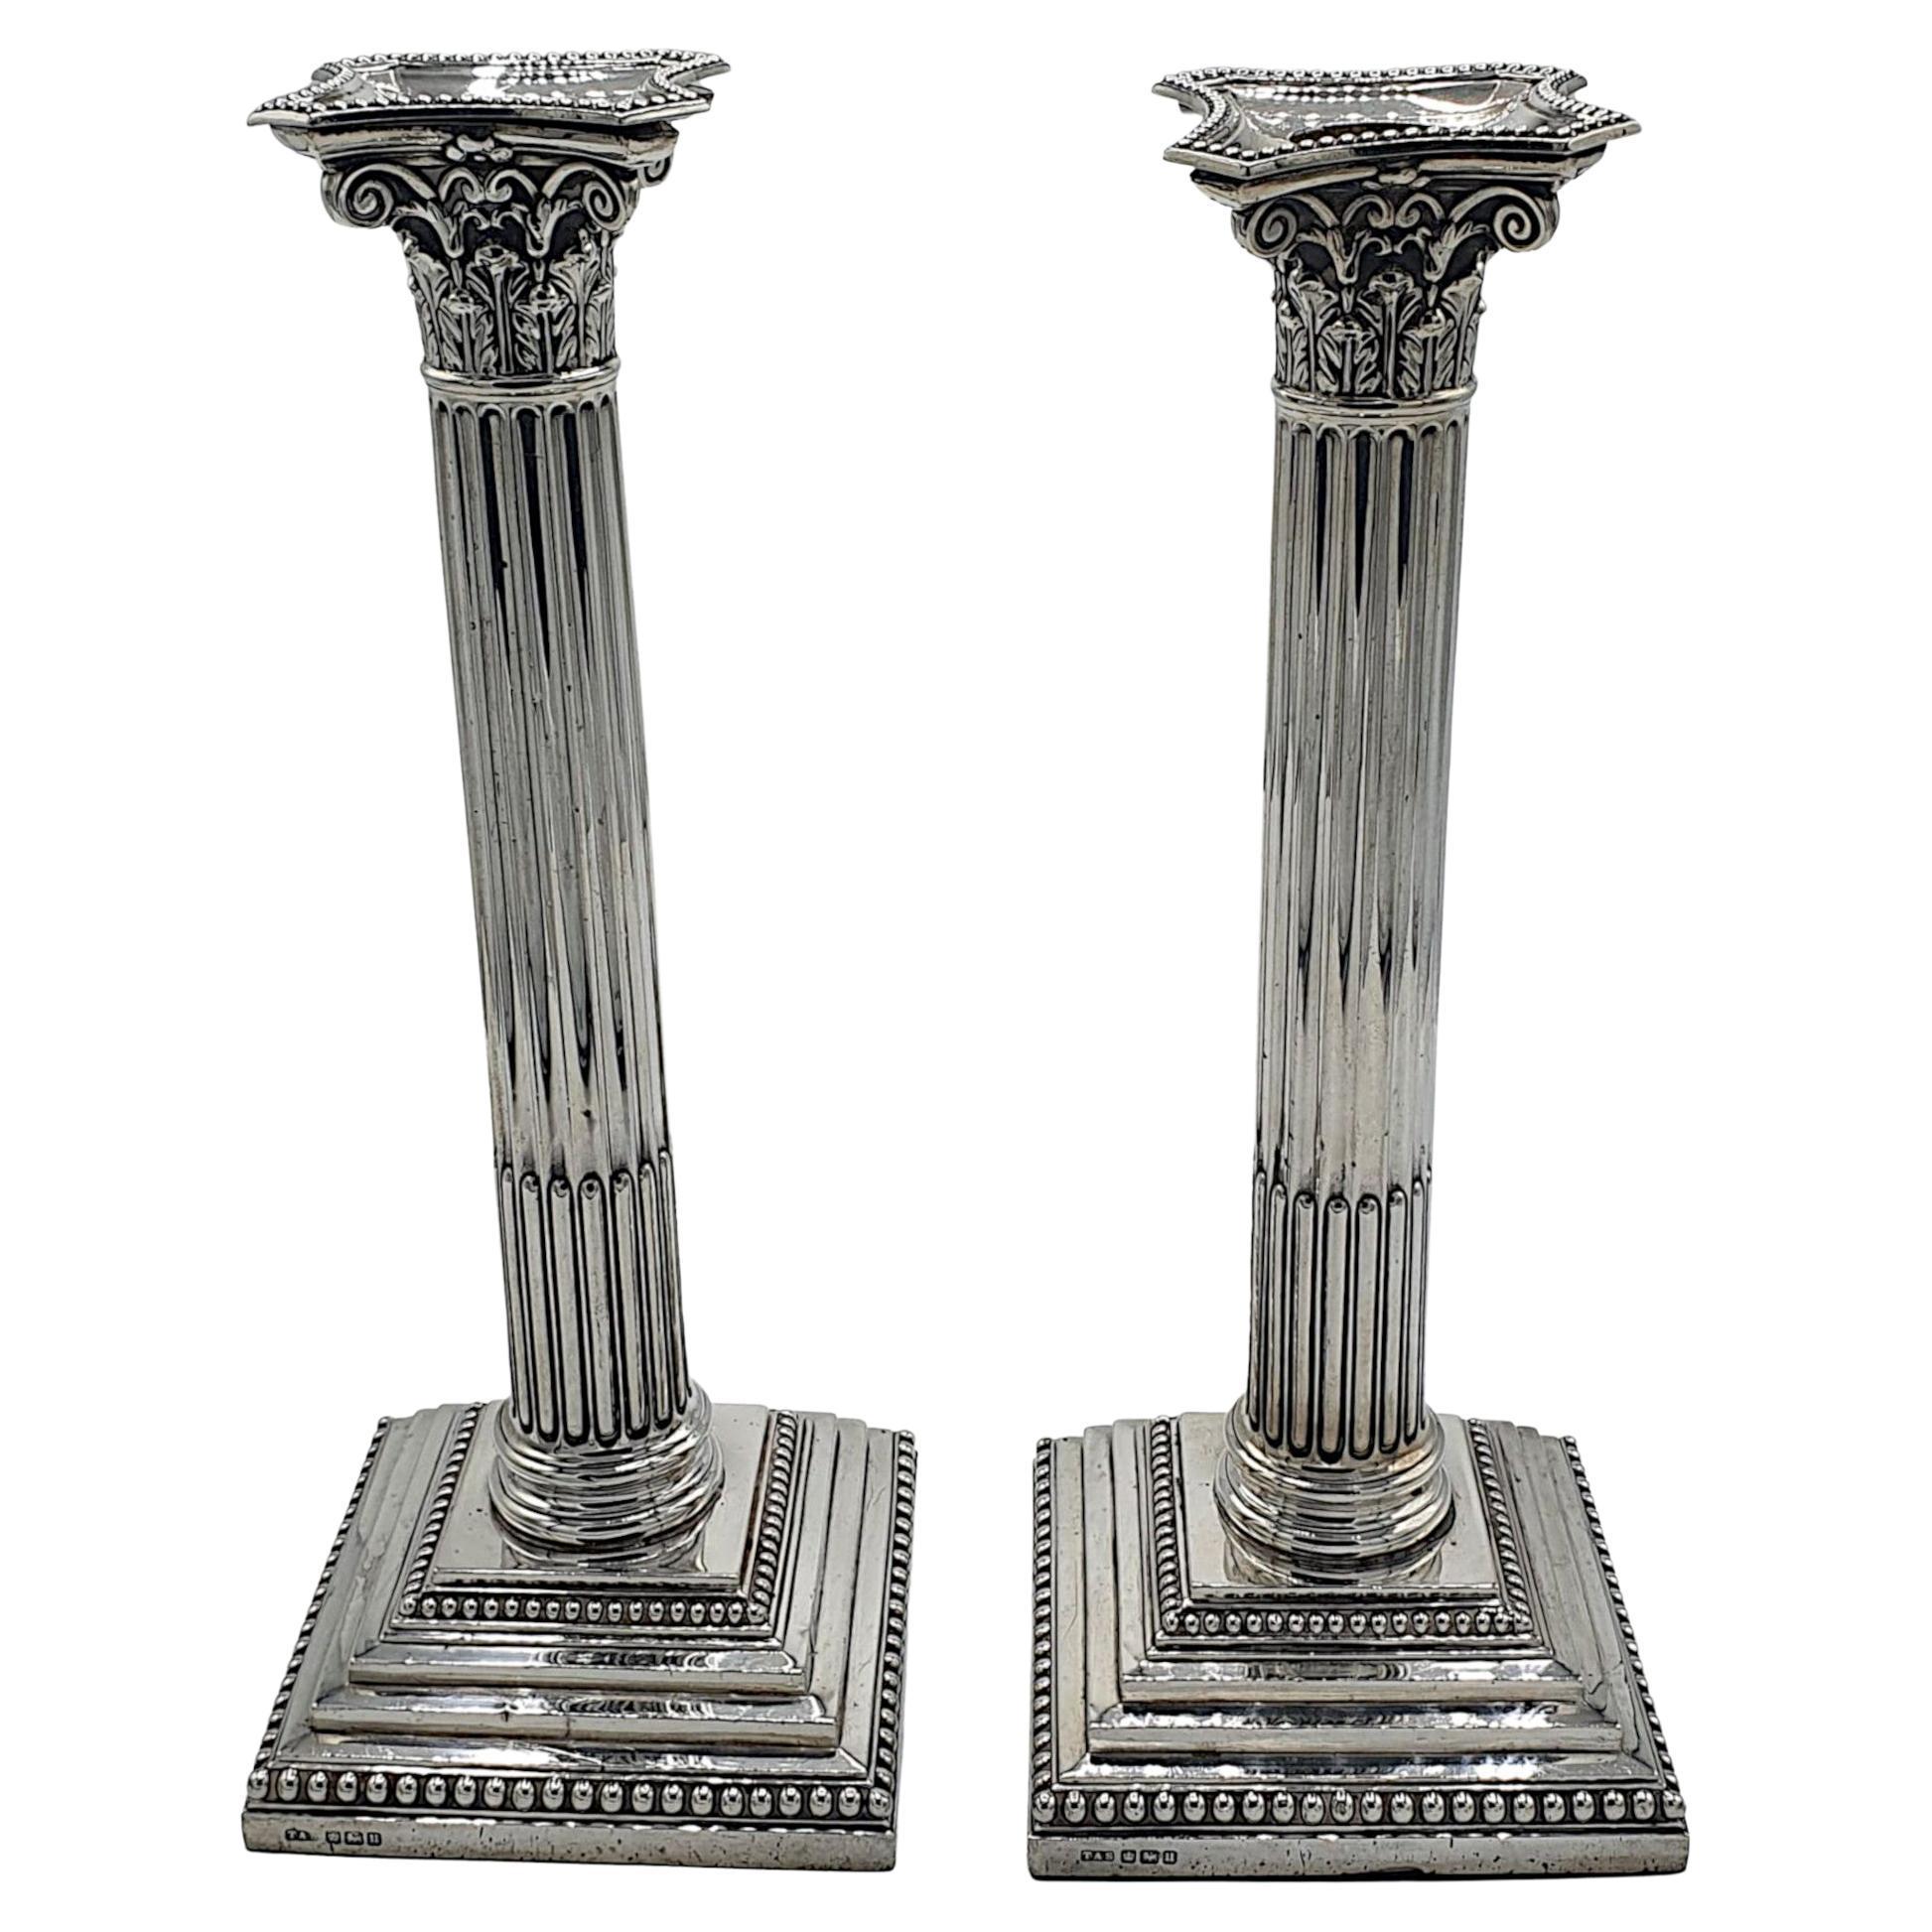 Very Fine Pair of Early 20th Century Corinthian Pillar Sterling Silver Candles